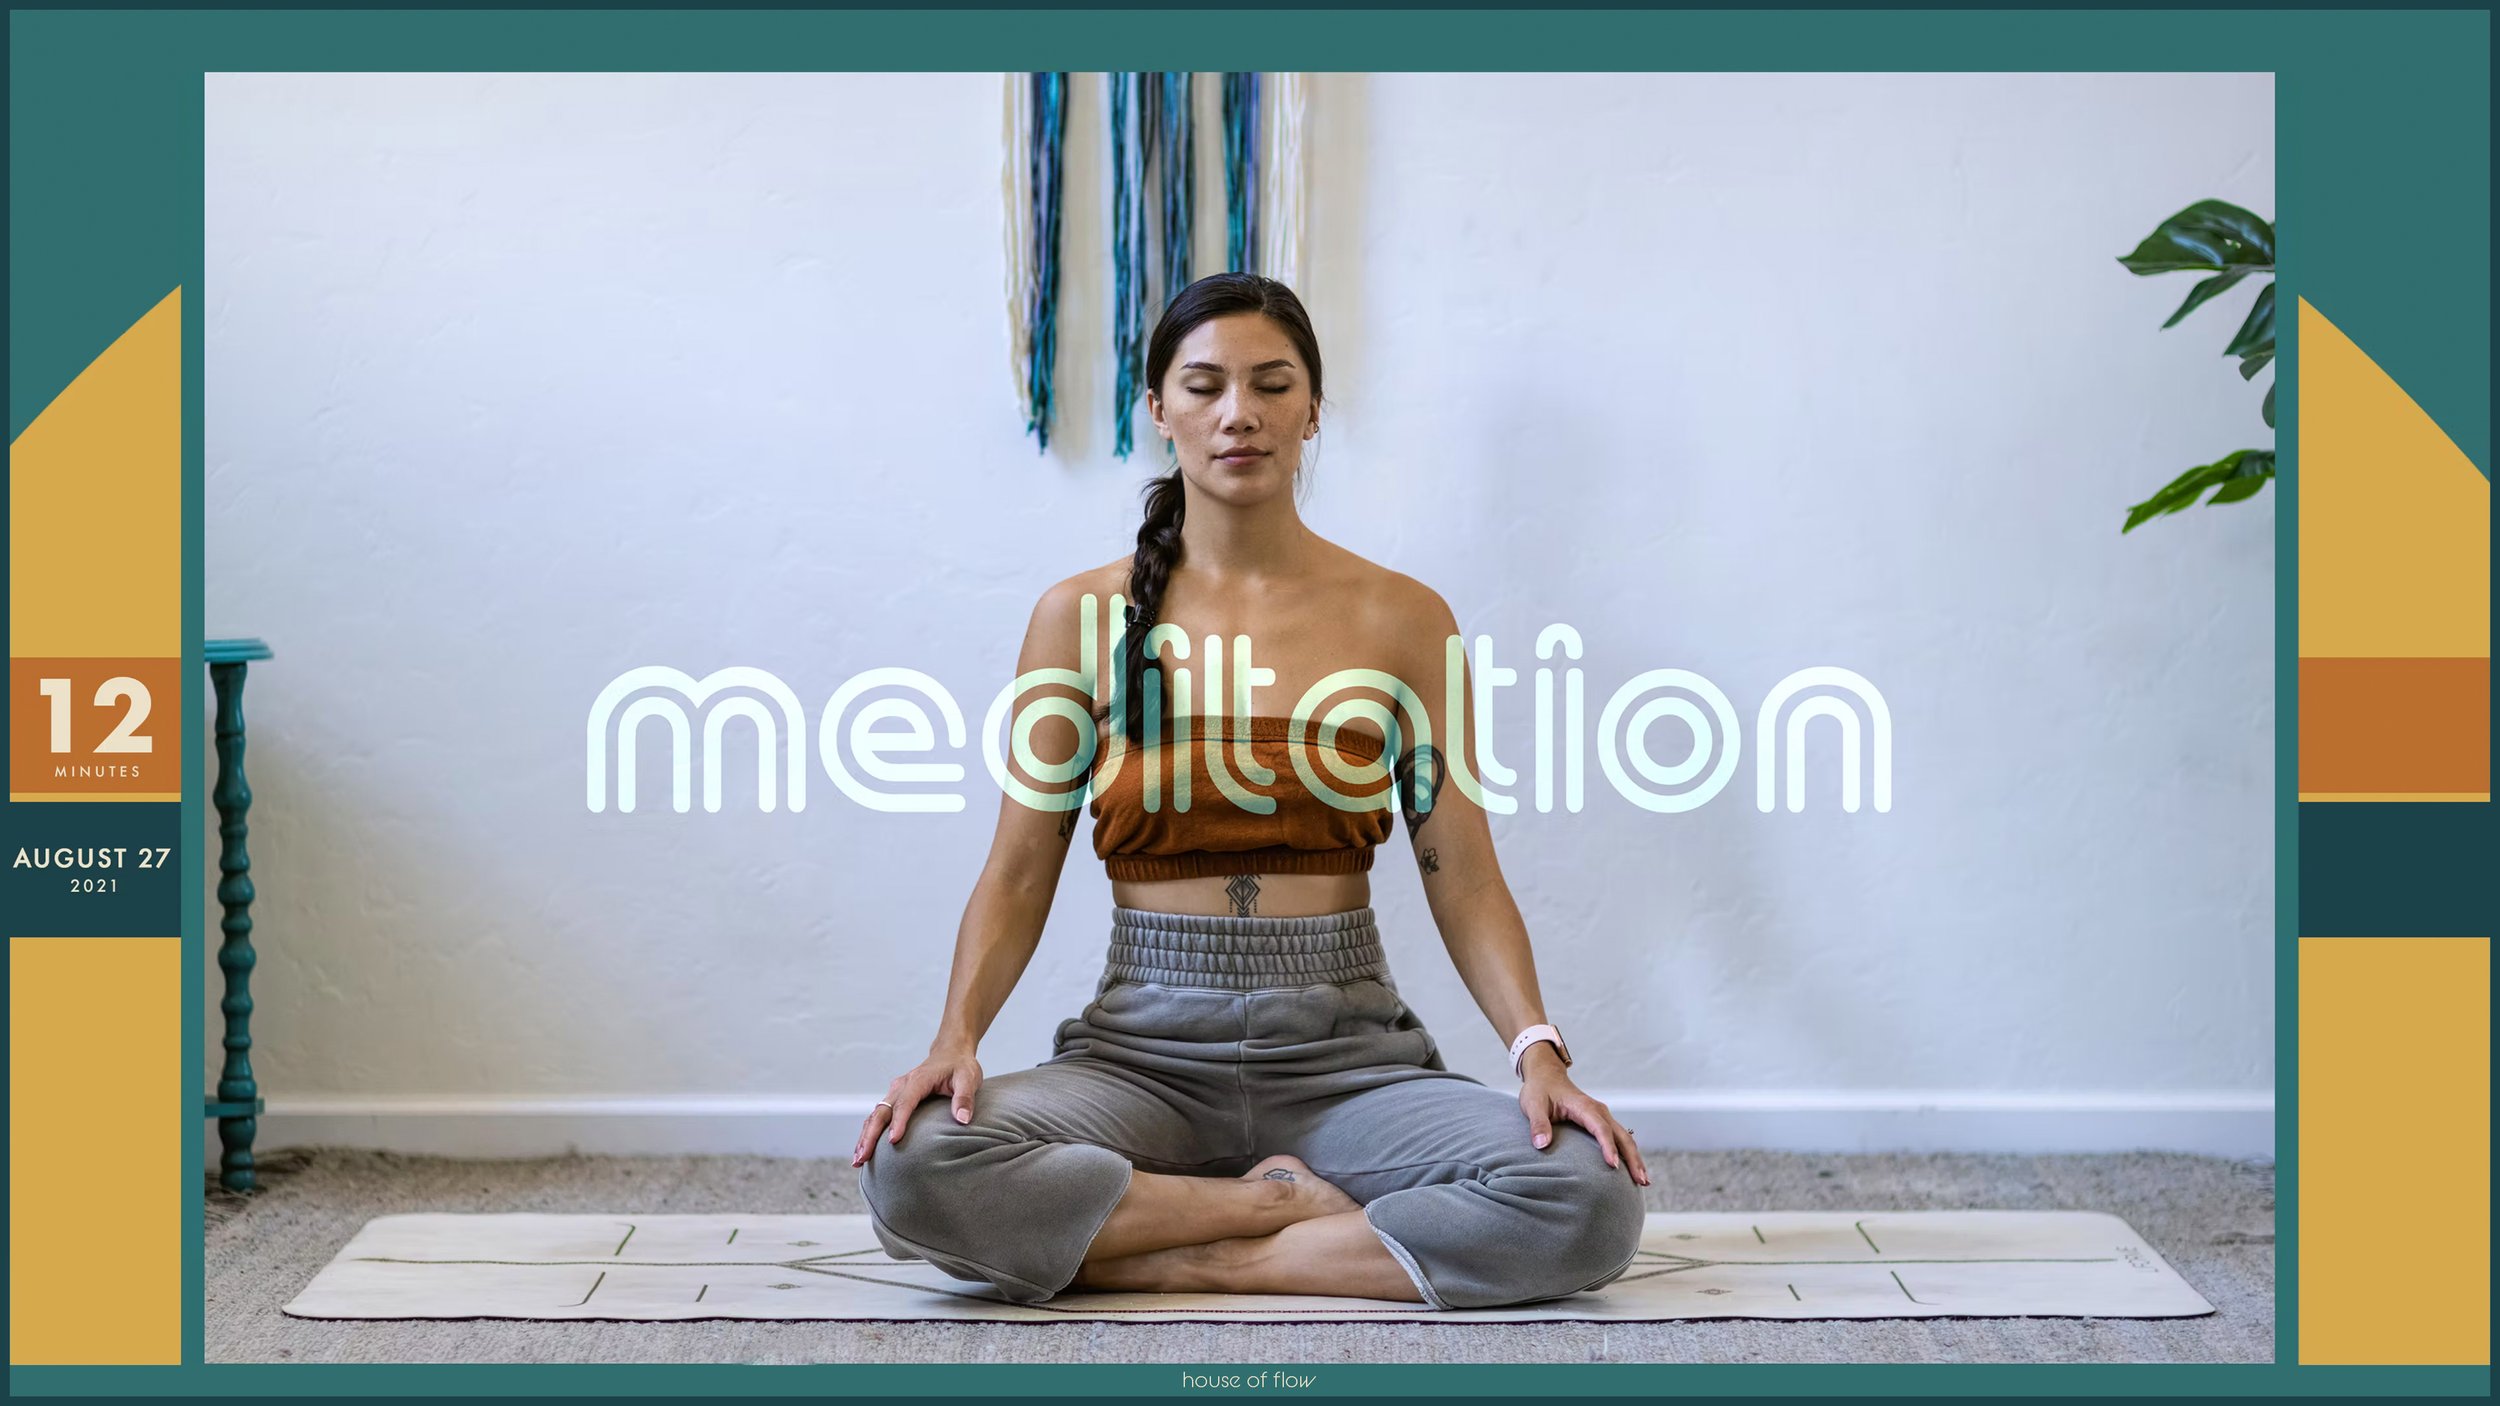 Meditation | Counting | 12 minutes